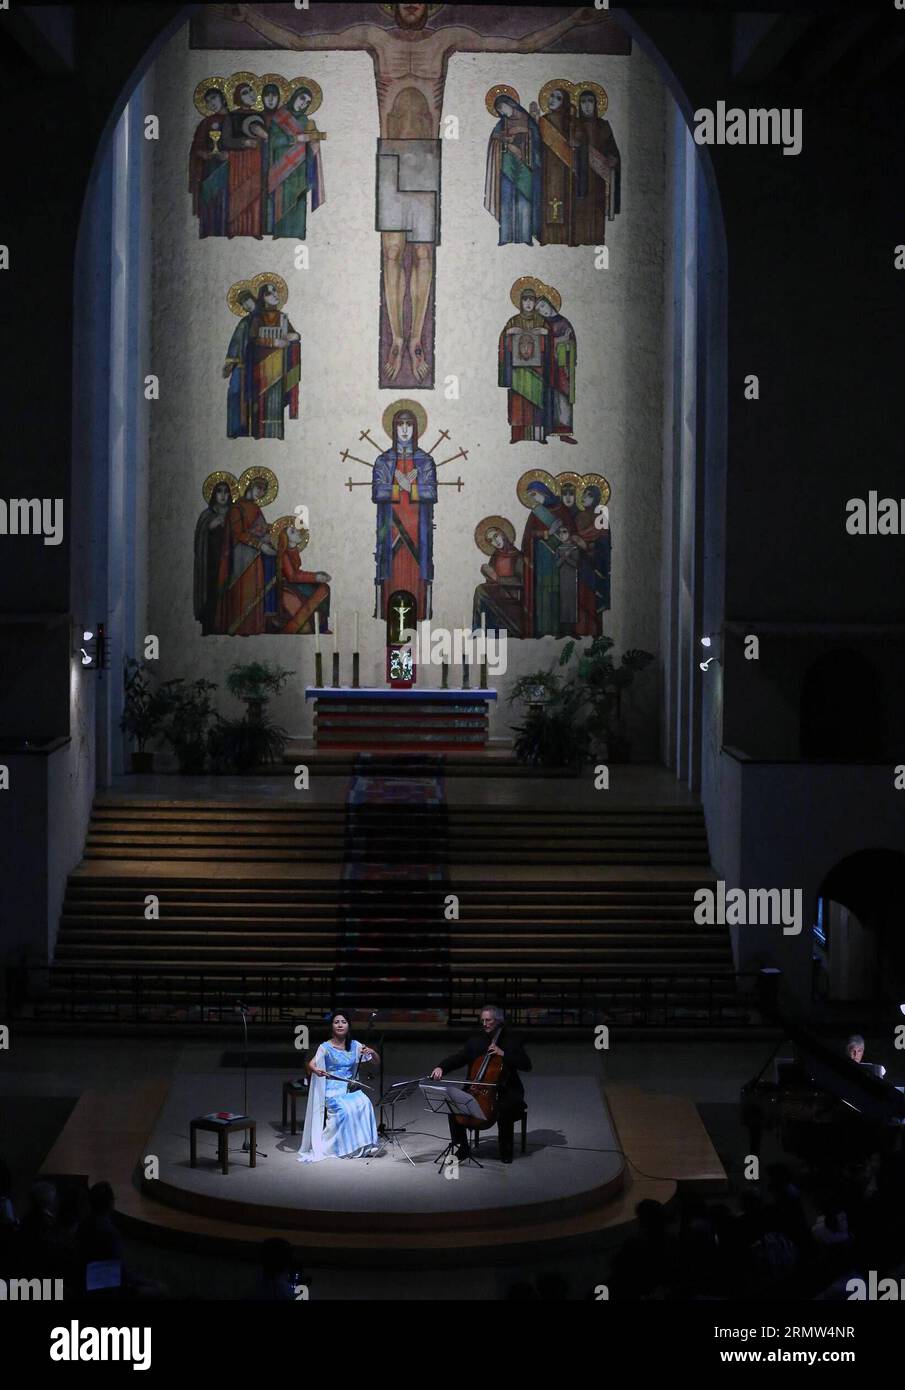 (141003) -- FRANKFURT, Oct. 3, 2014 -- Chinese musician Ma Xiaohui (L) performs Erhu, a two-stringed wooden instrument, with German violinist Daniel Robert Graf(C) and German pianist Carl-Martin Buttgereit(R) during a cencert held at a cathedral in Frankfurt, Germany, on Oct. 3, 2014. ) GERMANY-FRANKFURT-MA XIAOHUI-CONCERT LuoxHuanhuan PUBLICATIONxNOTxINxCHN   Frankfurt OCT 3 2014 Chinese Musician MA Xiaohui l performs Erhu a Two stringed Wooden Instrument With German Violinist Daniel Robert Graf C and German Pianist Carl Martin Buttgereit r during a  Hero AT a Cathedral in Frankfurt Germany O Stock Photo